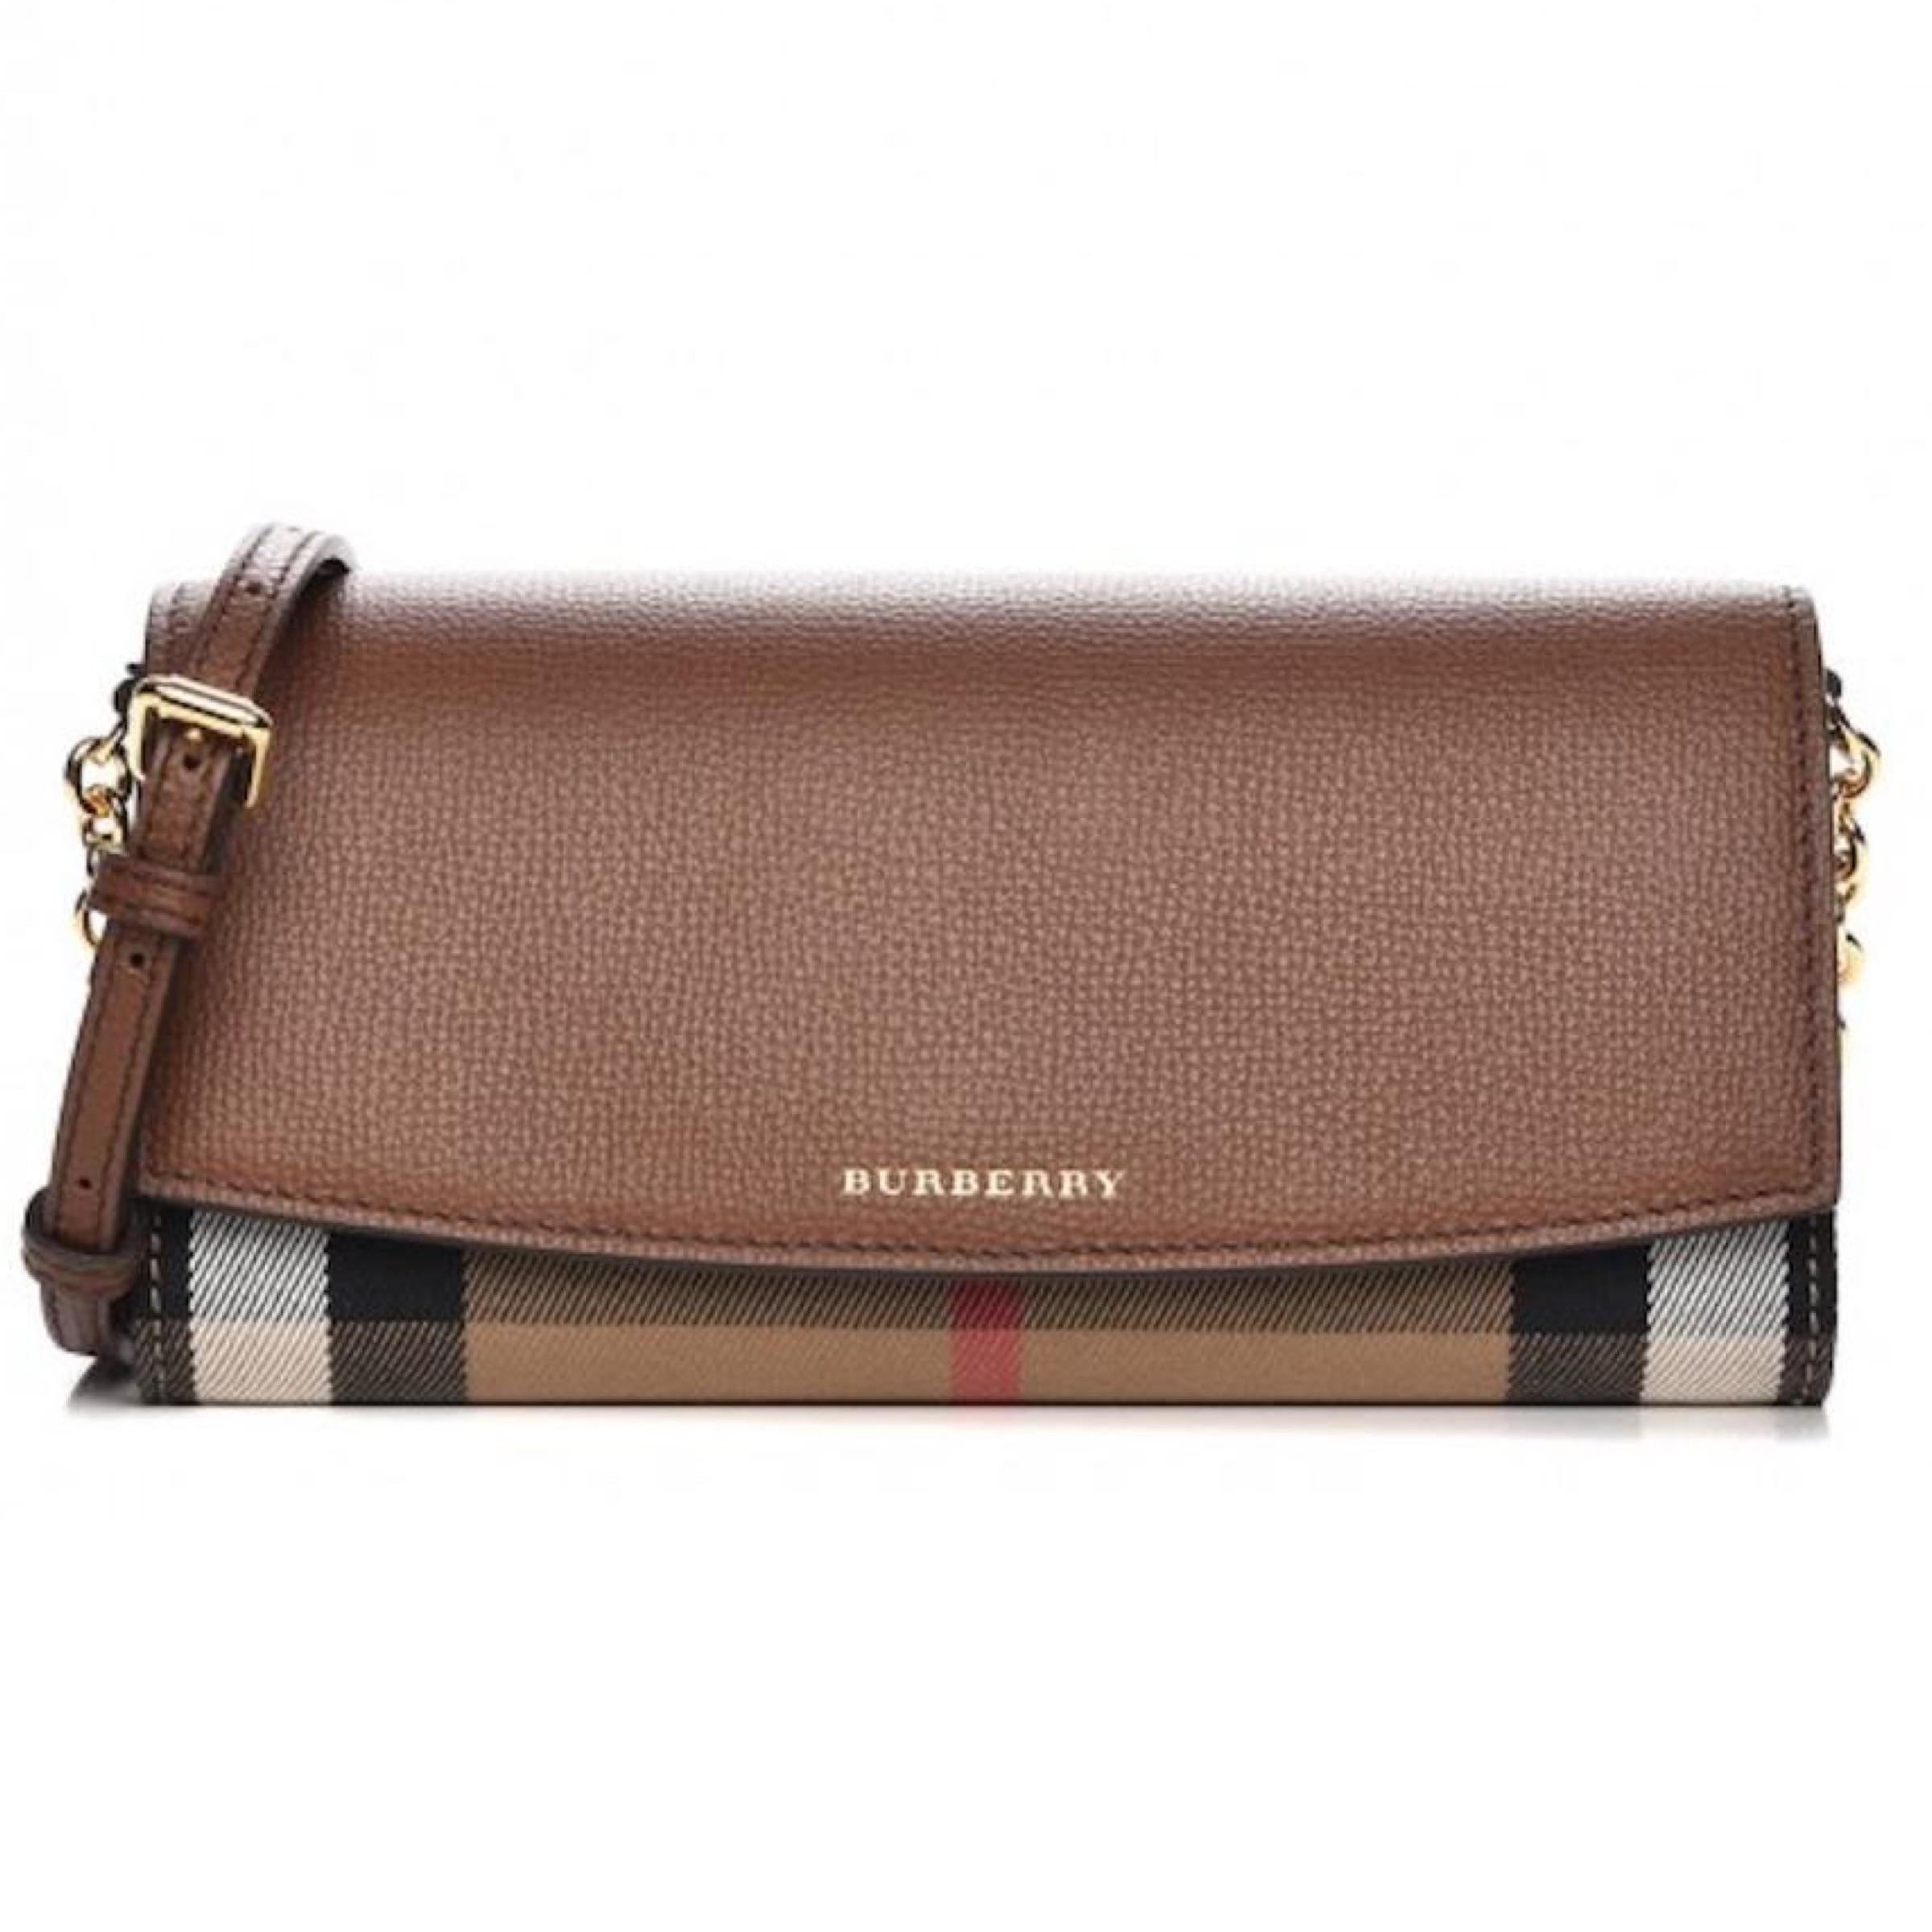 New Burberry Brown Henley House Check Leather Clutch Crossbody Bag

Authenticity Guaranteed

DETAILS
Brand: Burberry
Condition: Brand new
Gender: Women
Category: Crossbody bag
Color: Brown
Material: Leather
Check pattern details
Gold-tone